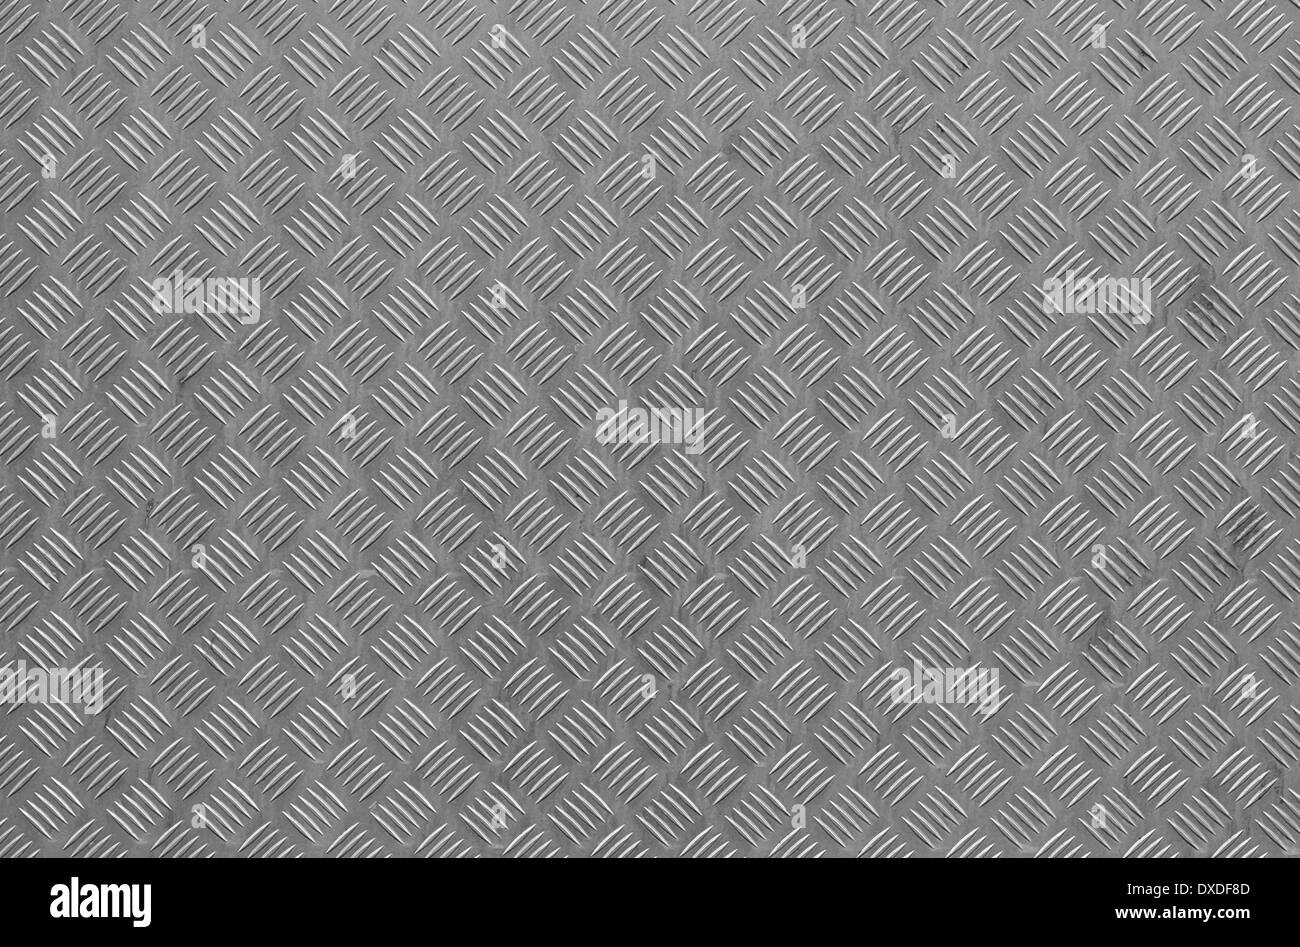 Metal flooring background texture great for tough construction and tool supply backdrops Stock Photo